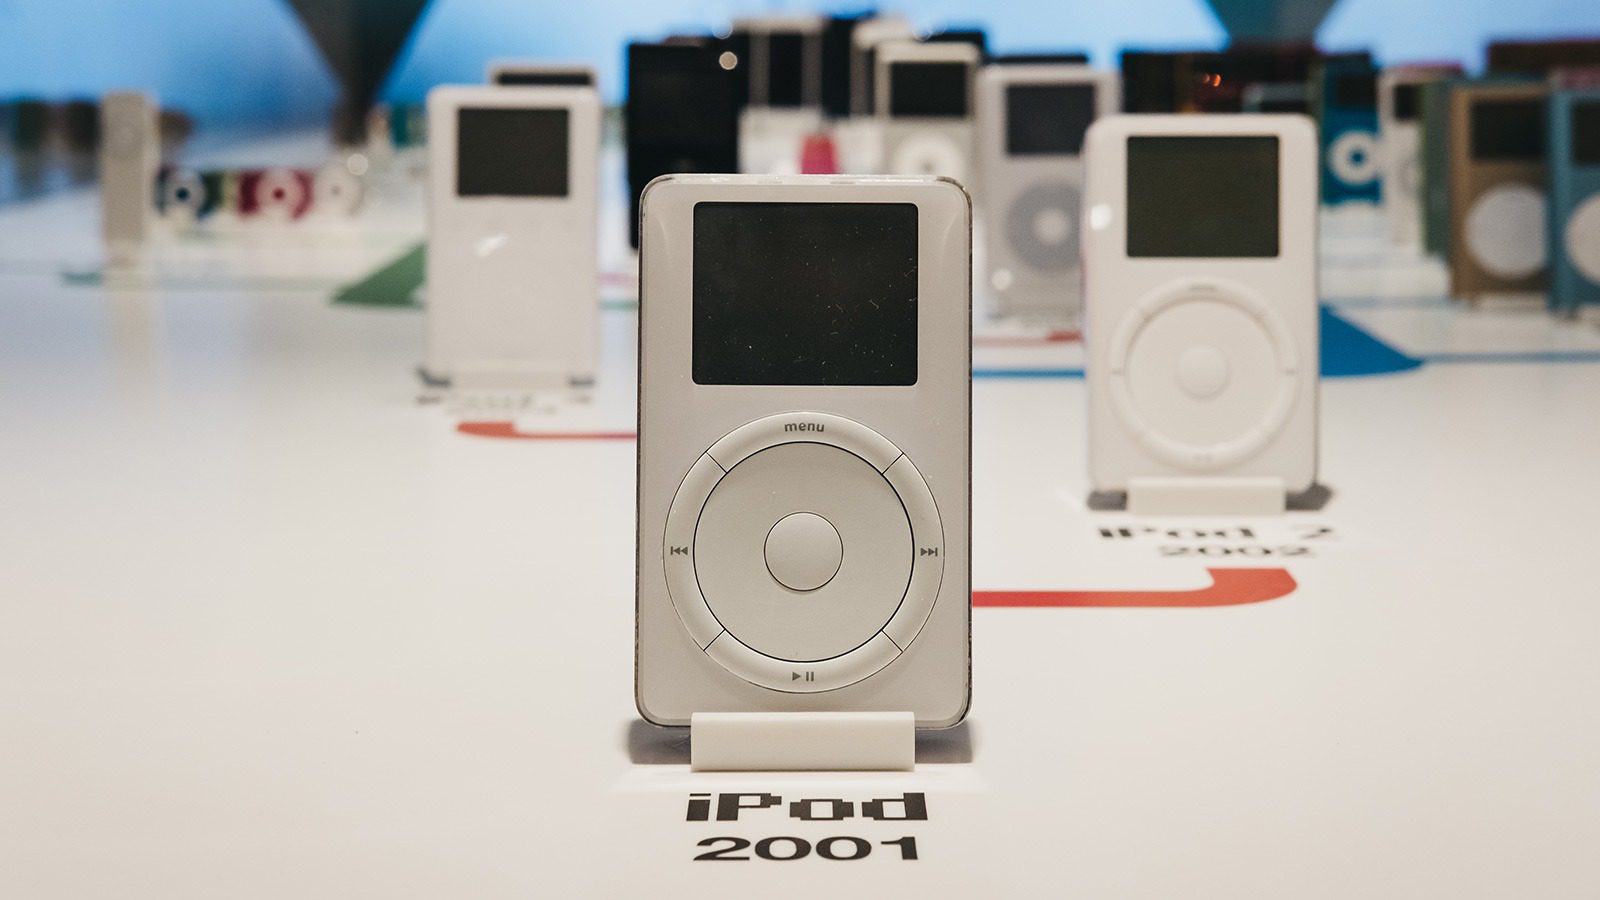 Apple’s iPod came out two decades ago & changed how we listen to music. Where are we headed now?